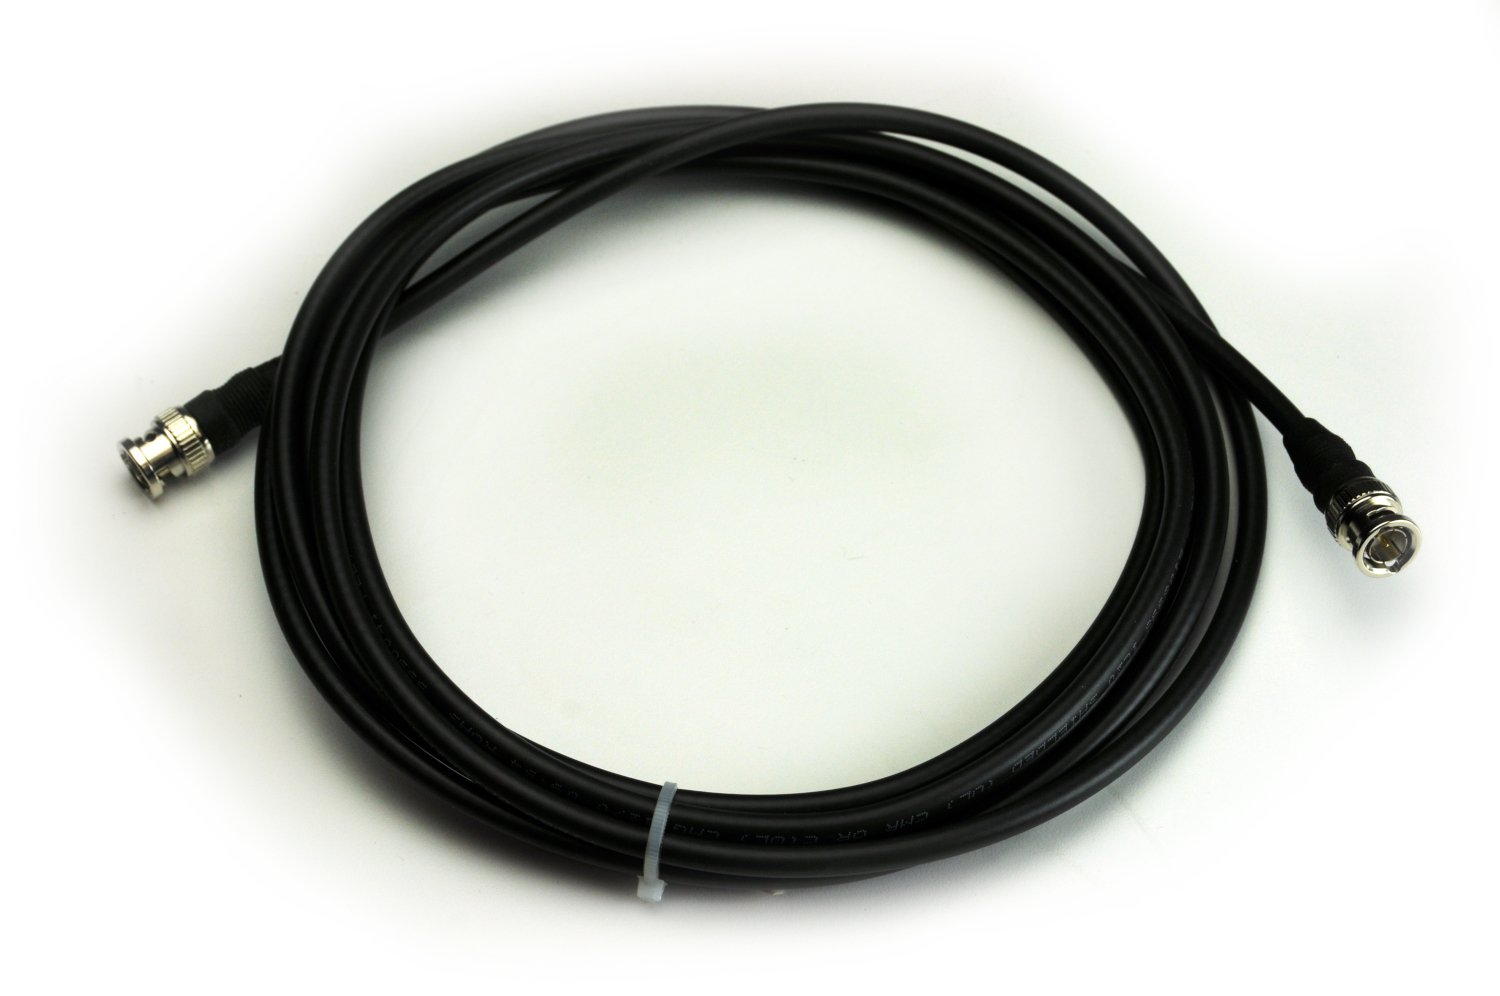 Photos - Cable (video, audio, USB) Whirlwind BNCRG59-025 25' 75 Ohm RG59 BNC to BNC Video Cable 